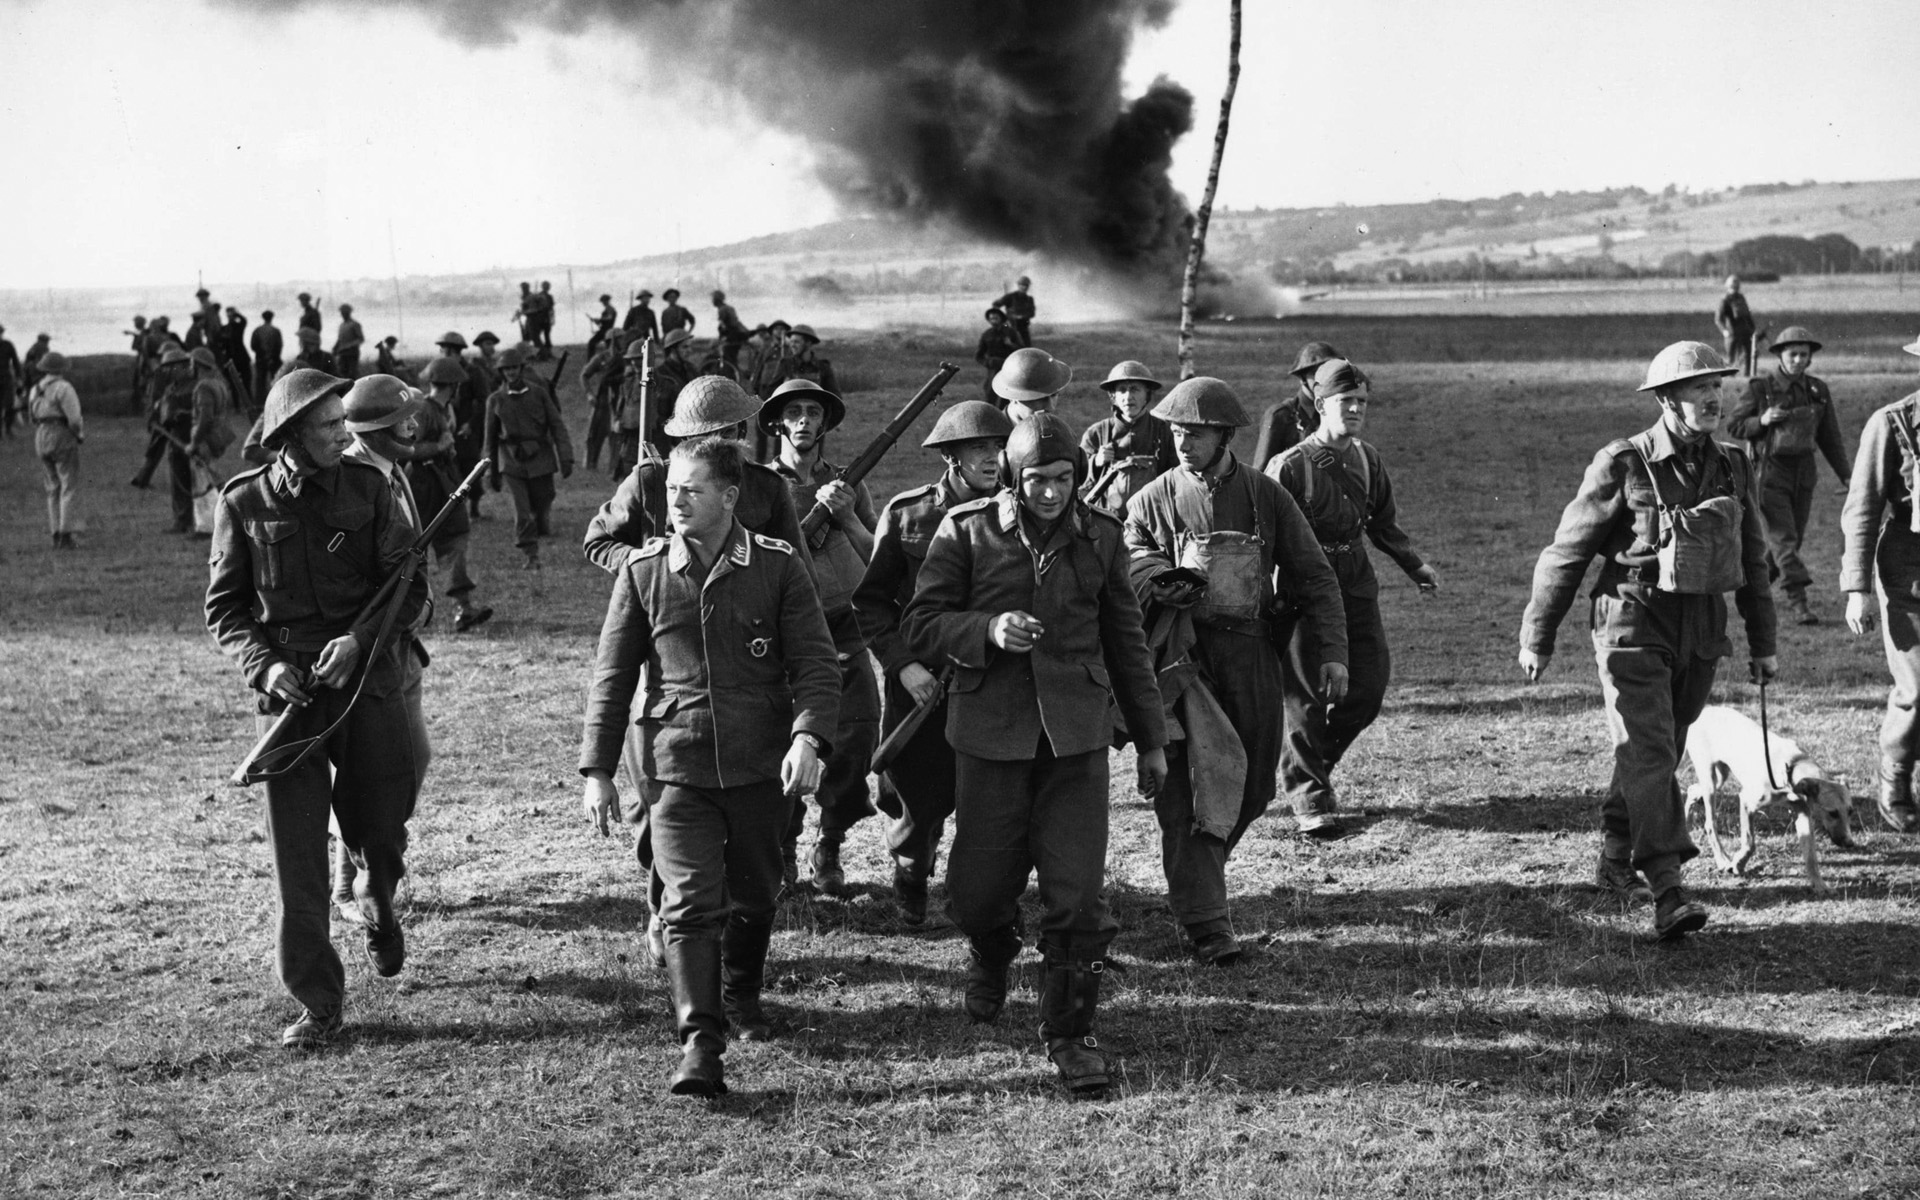 Two German airmen, who parachuted from their shot-down Heinkel He-111 bomber (burning in the background) are marched off by the Home Guard in Goodwood, Sussex.